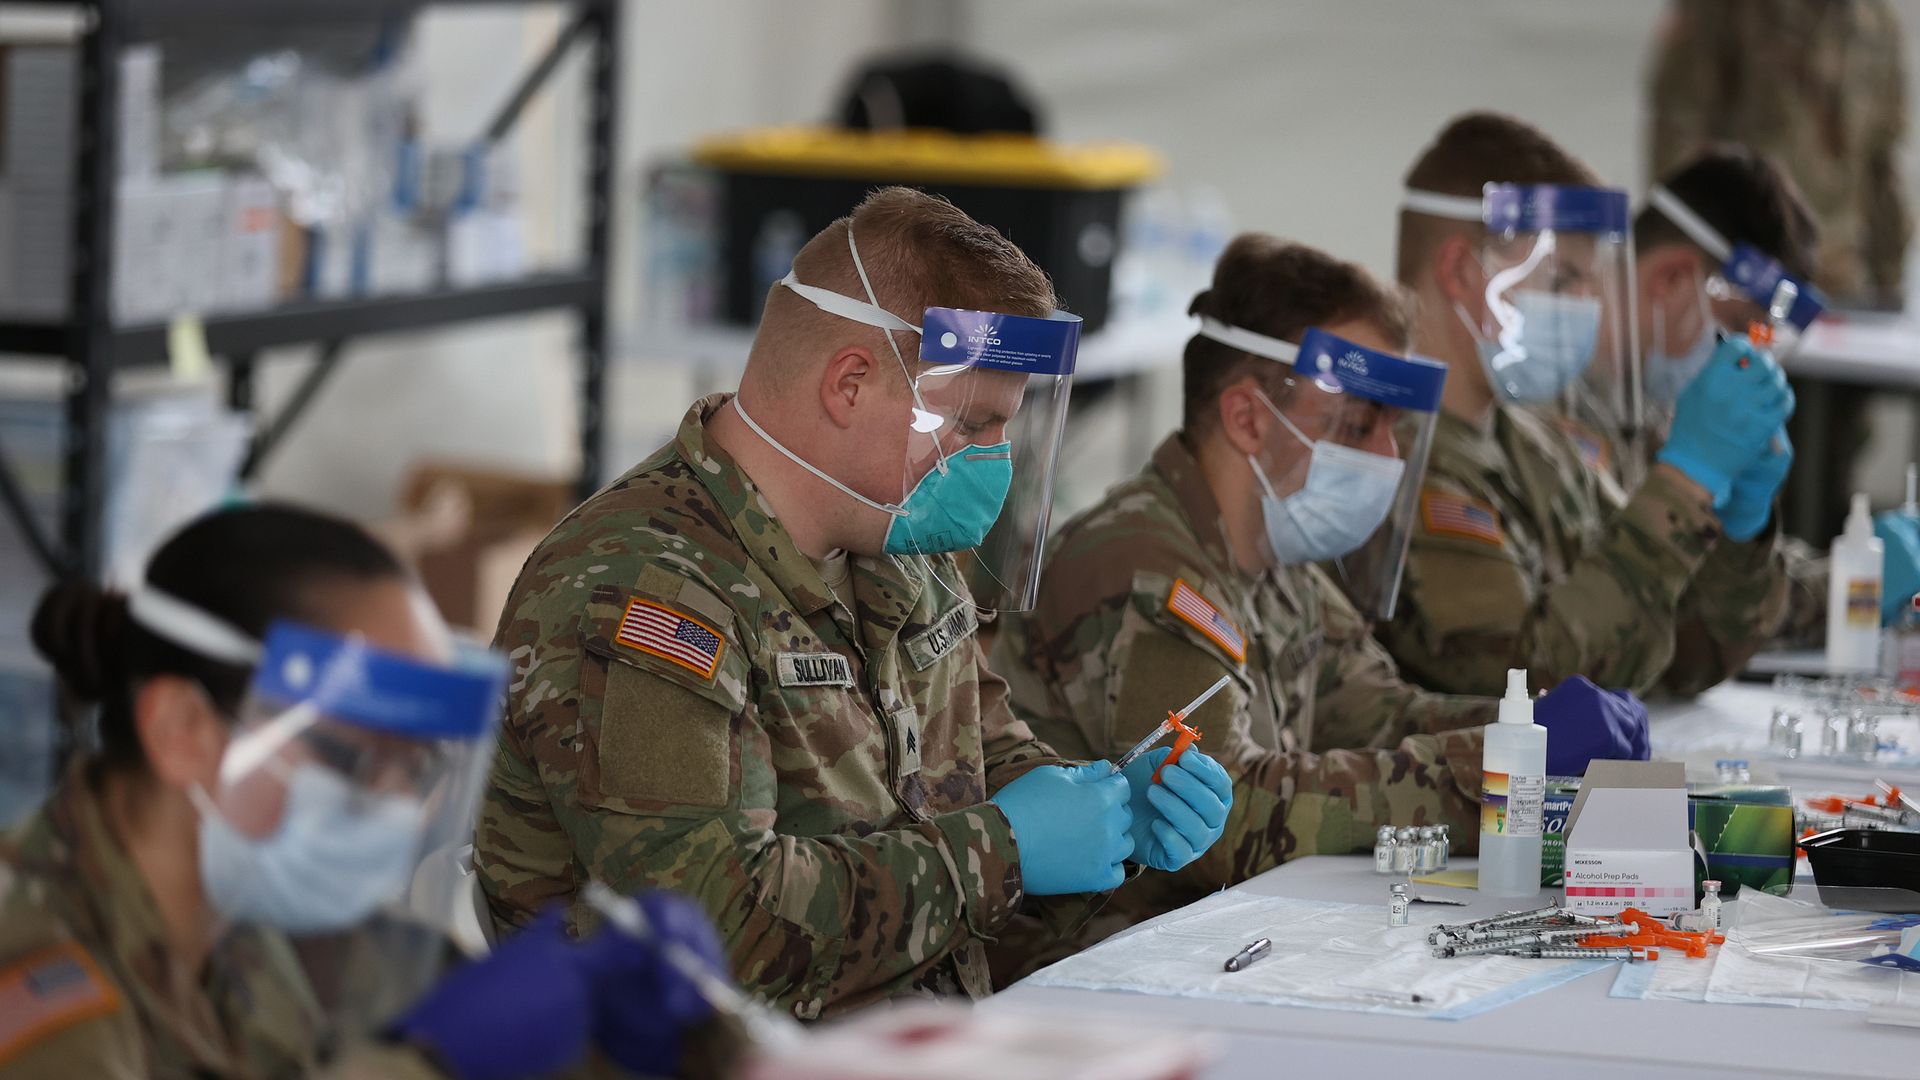 U.S. Army soldiers from the 2nd Armored Brigade Combat Team, 1st Infantry Division, prepare Pfizer COVID-19 vaccines to inoculate people at the Miami Dade College North Campus on March 10, 2021